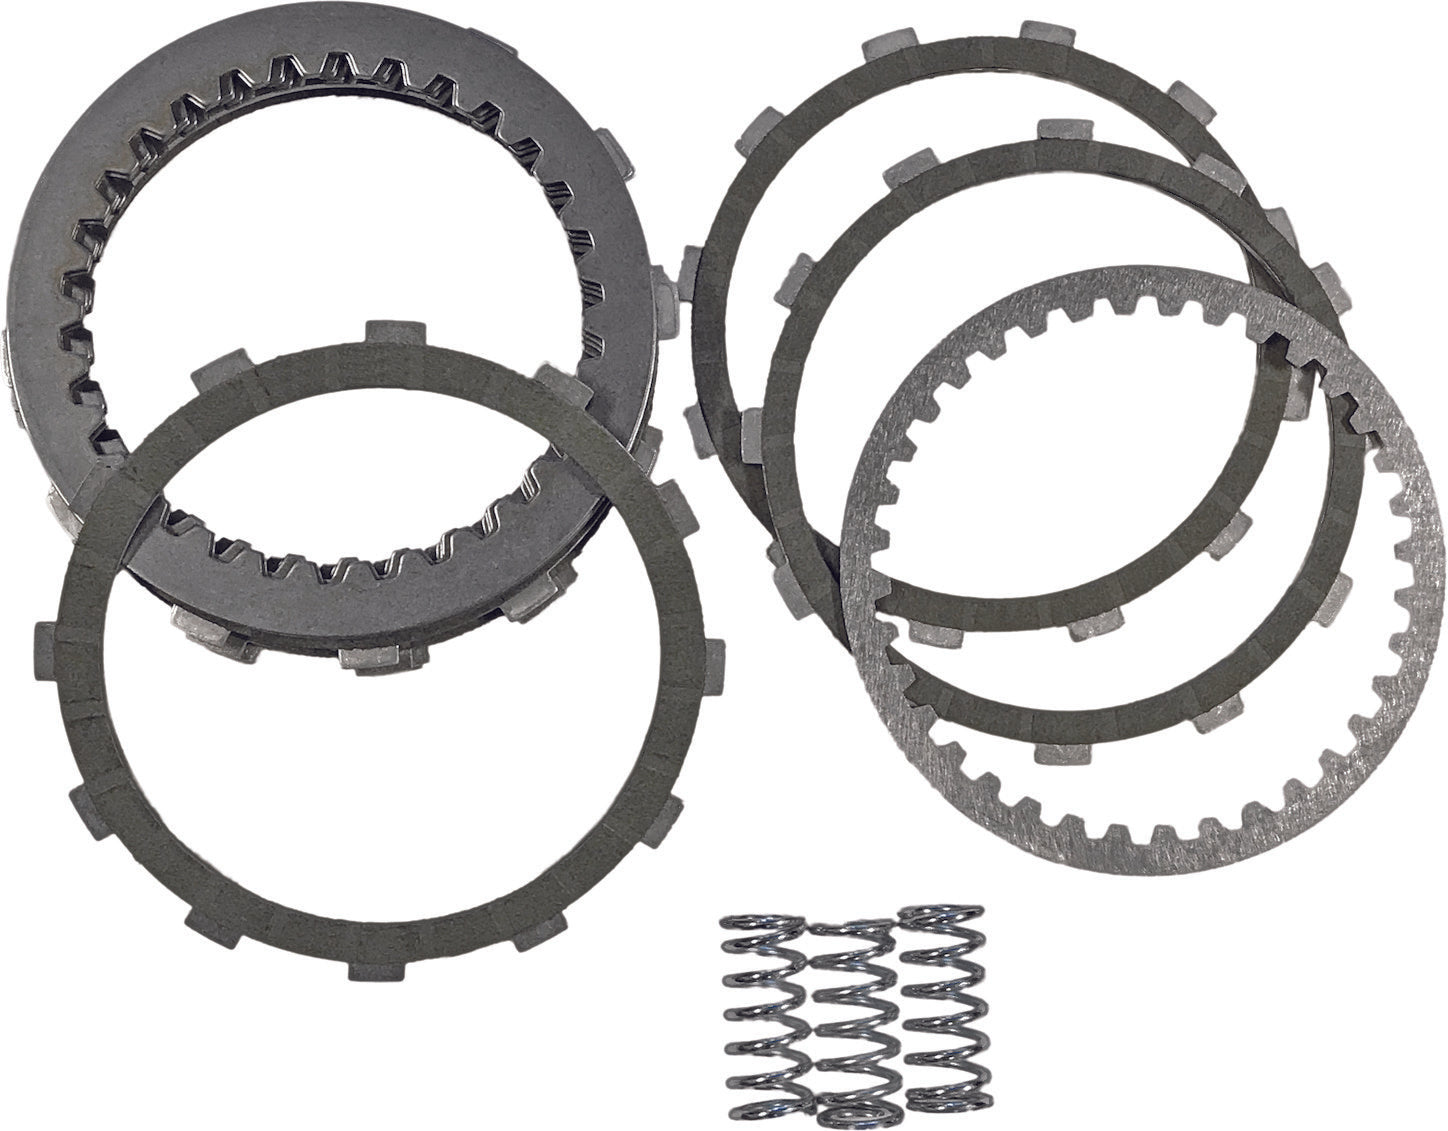 ENERGY ONE, ENERGY ONE E1 CLUTCH KIT FOR CVO FITS 13-17 CV-1317